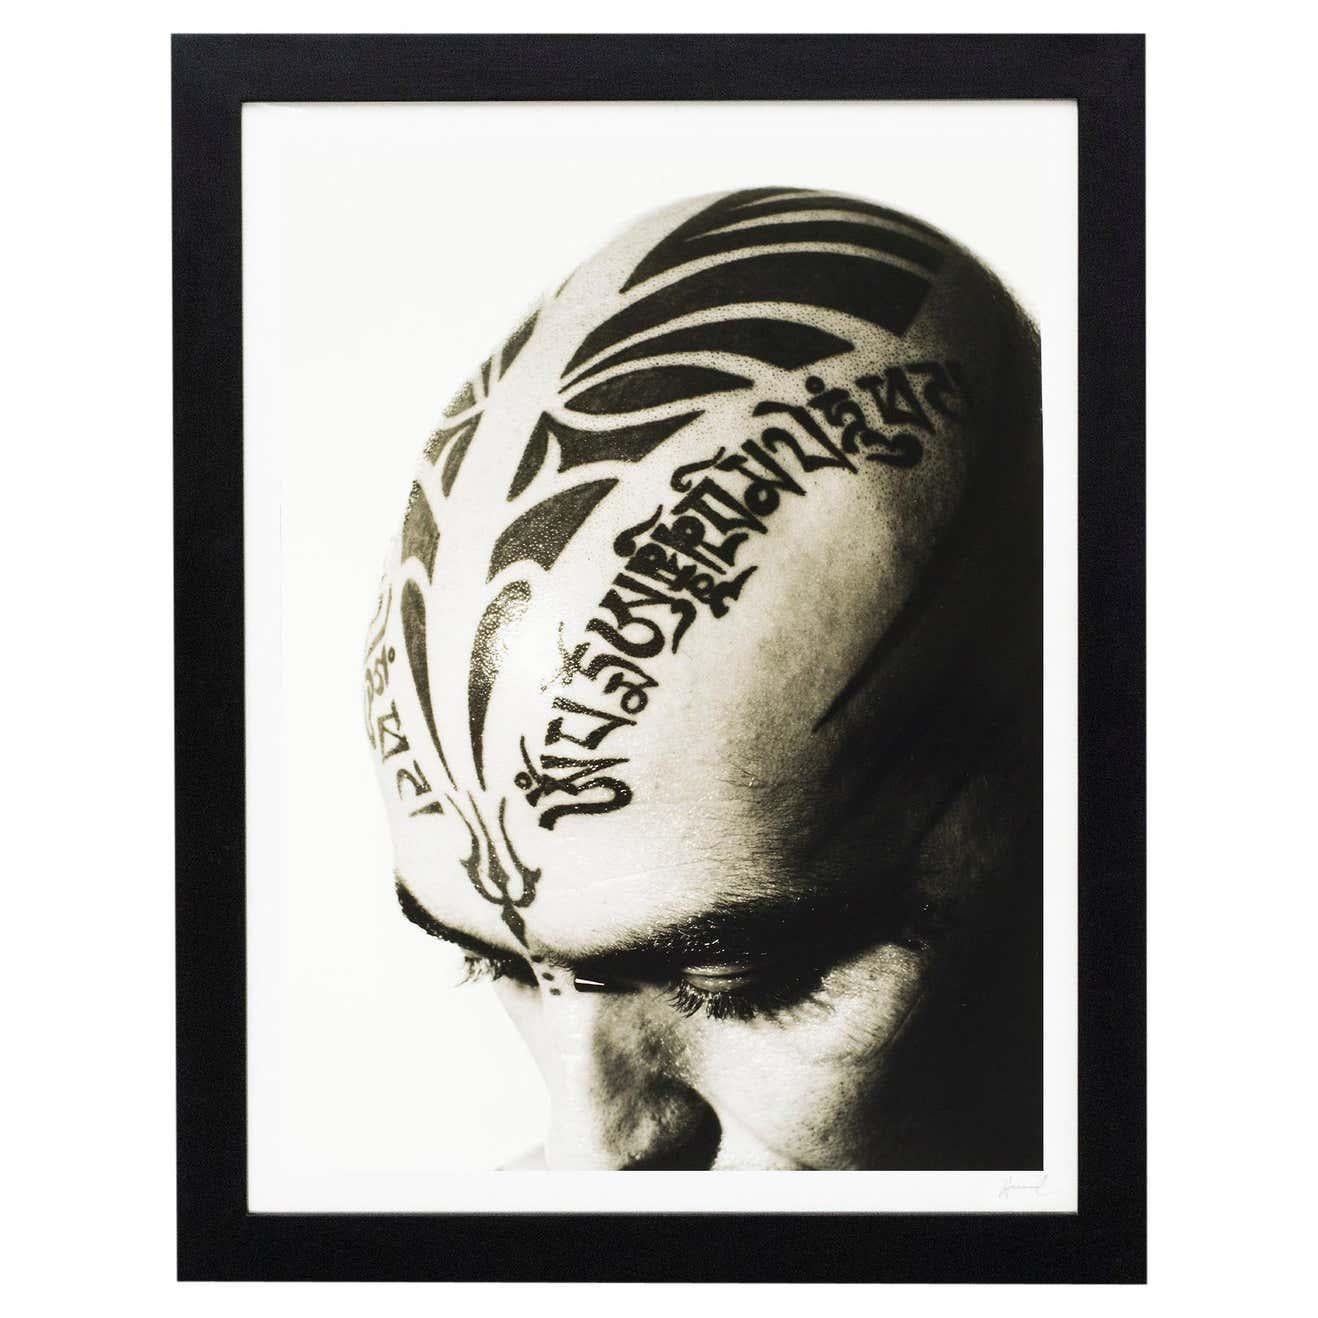 Miquel Arnal Artistic Photograph of a Tattooed Man, circa 1990 For Sale